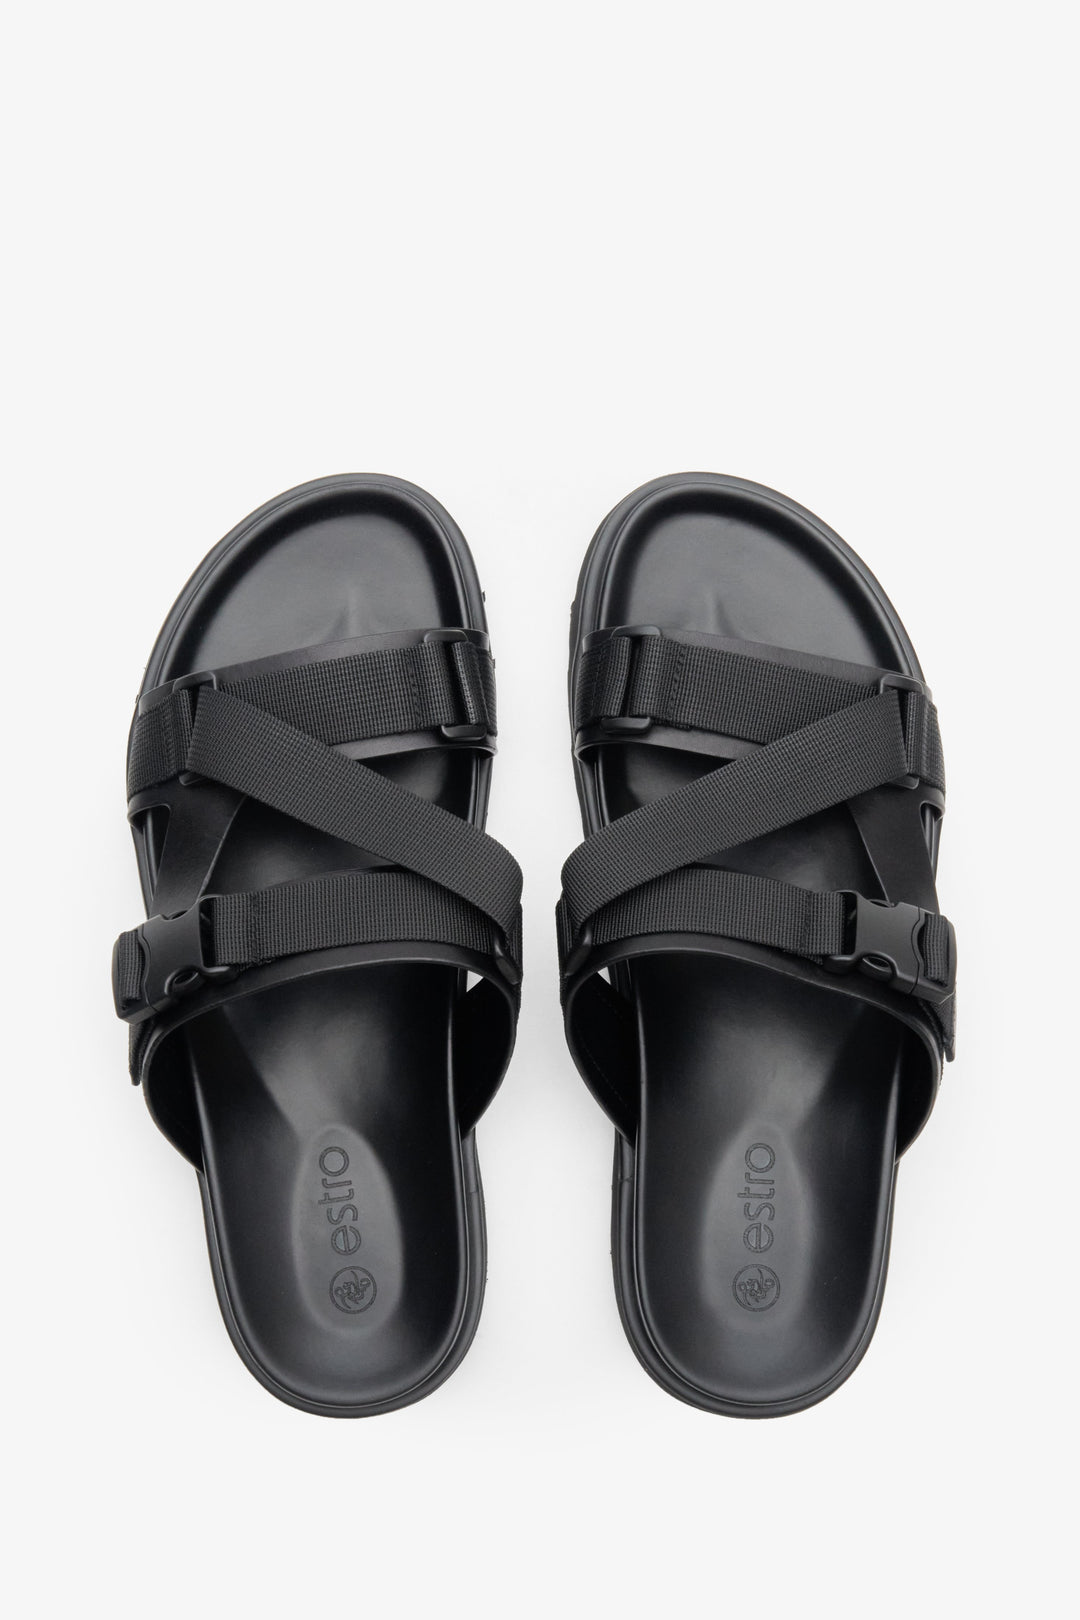 Men's black Estro leather slides made of genuine leather and textiles - top view presentation.